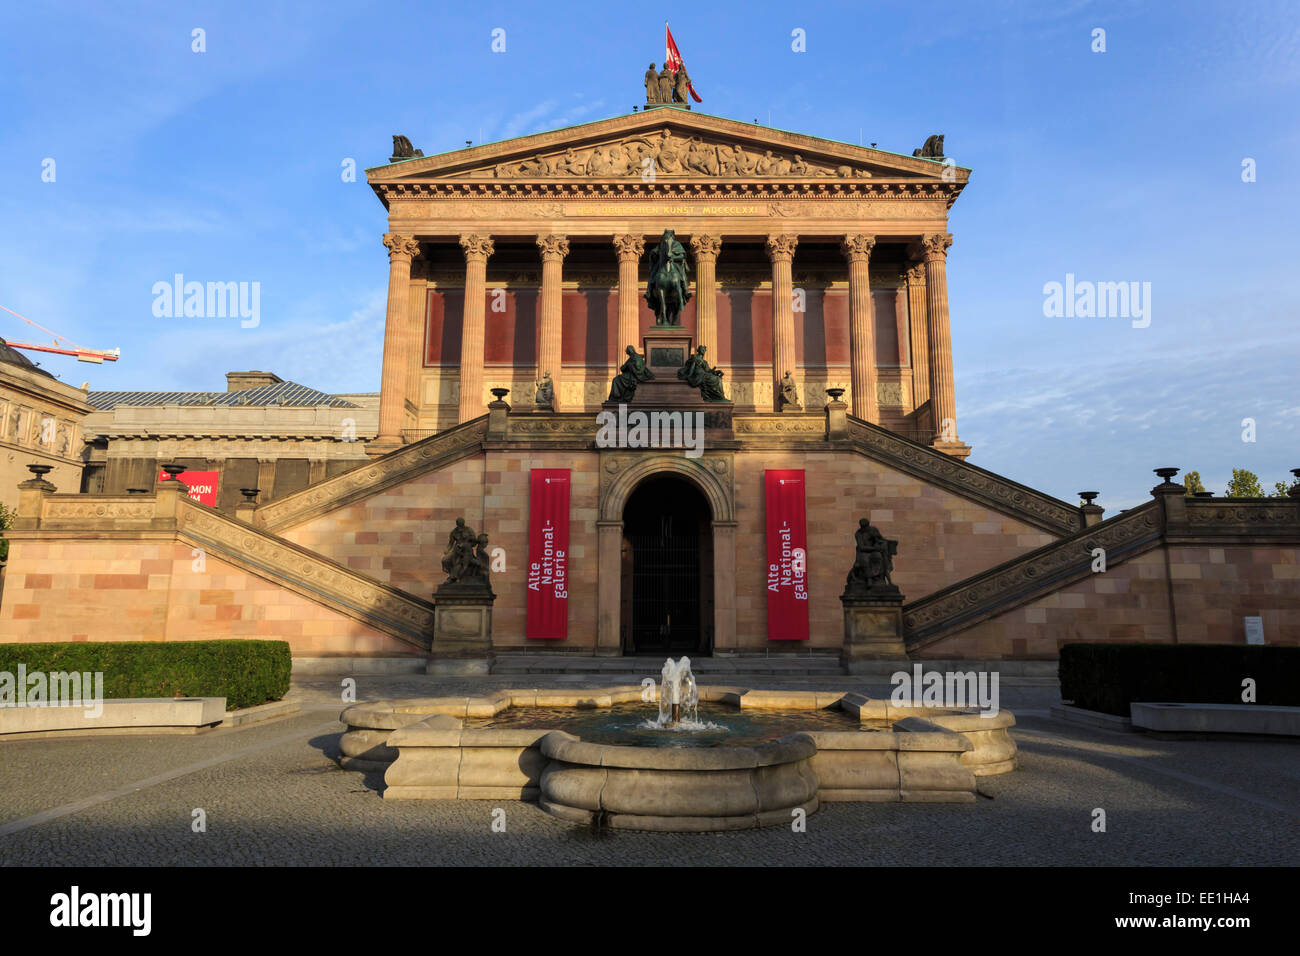 Alte Nationalgalerie (Old National Gallery), lit by early morning sun, Museum Island, Berlin, Germany, Europe Stock Photo